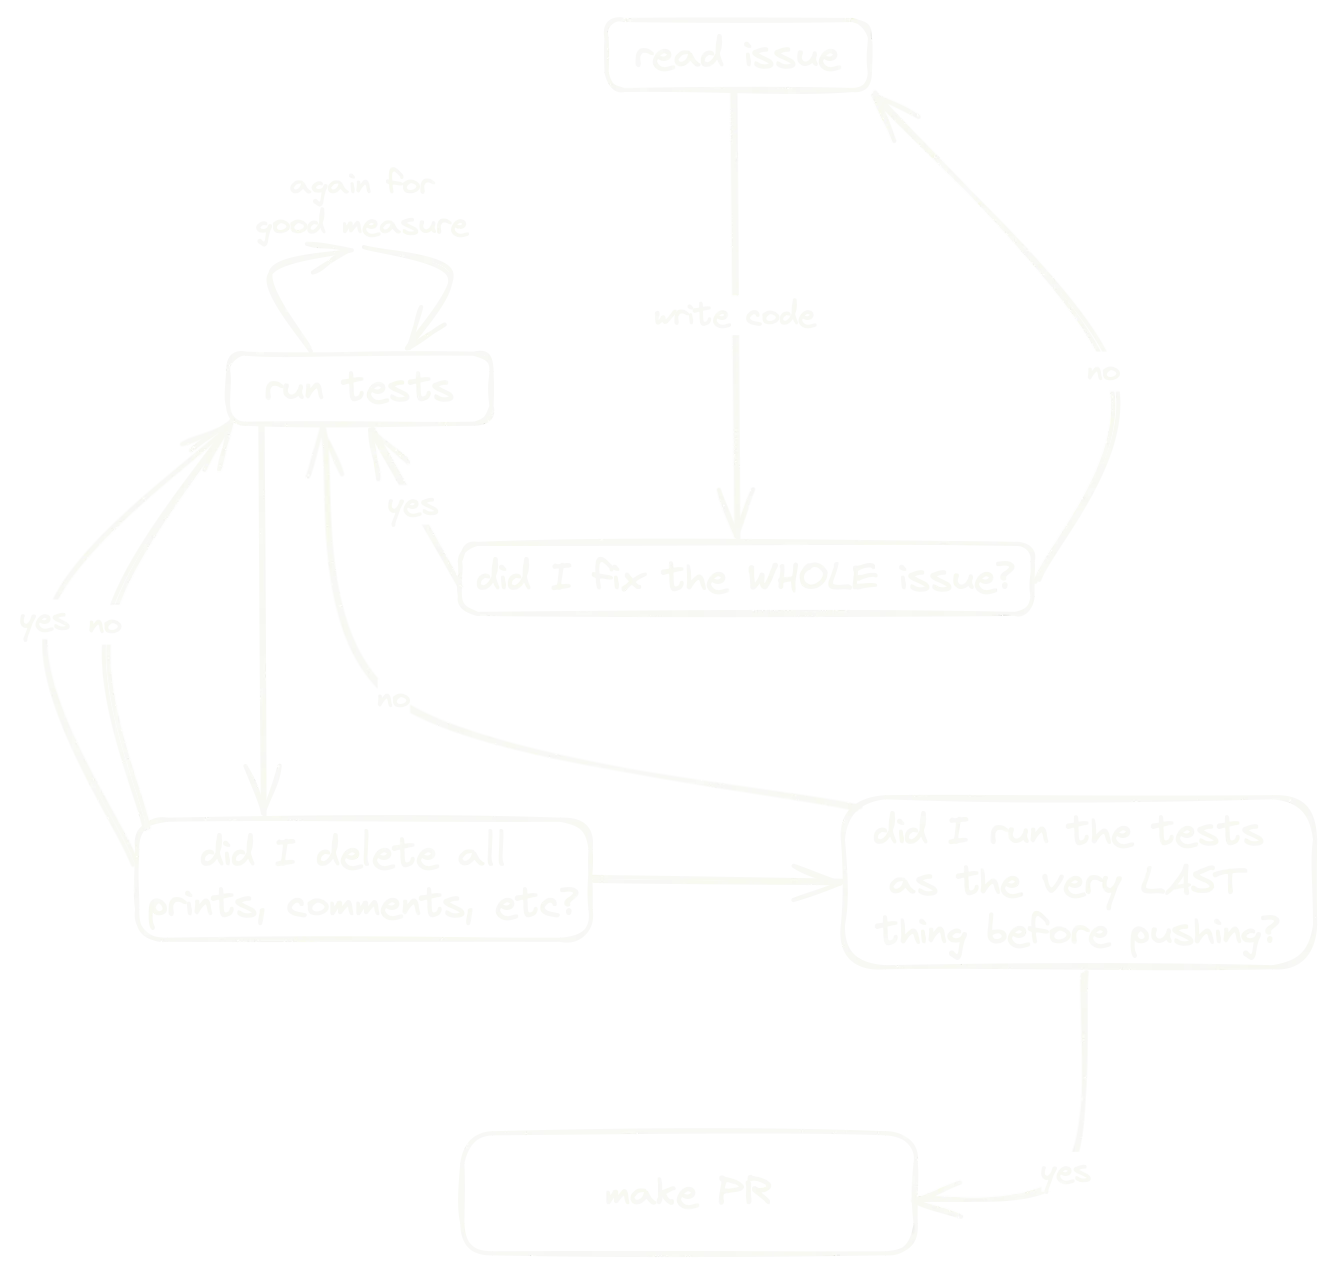 A flowchart that I used to decide whether I could make a pull request or not. The flowchart emphasises how often I ran the tests.